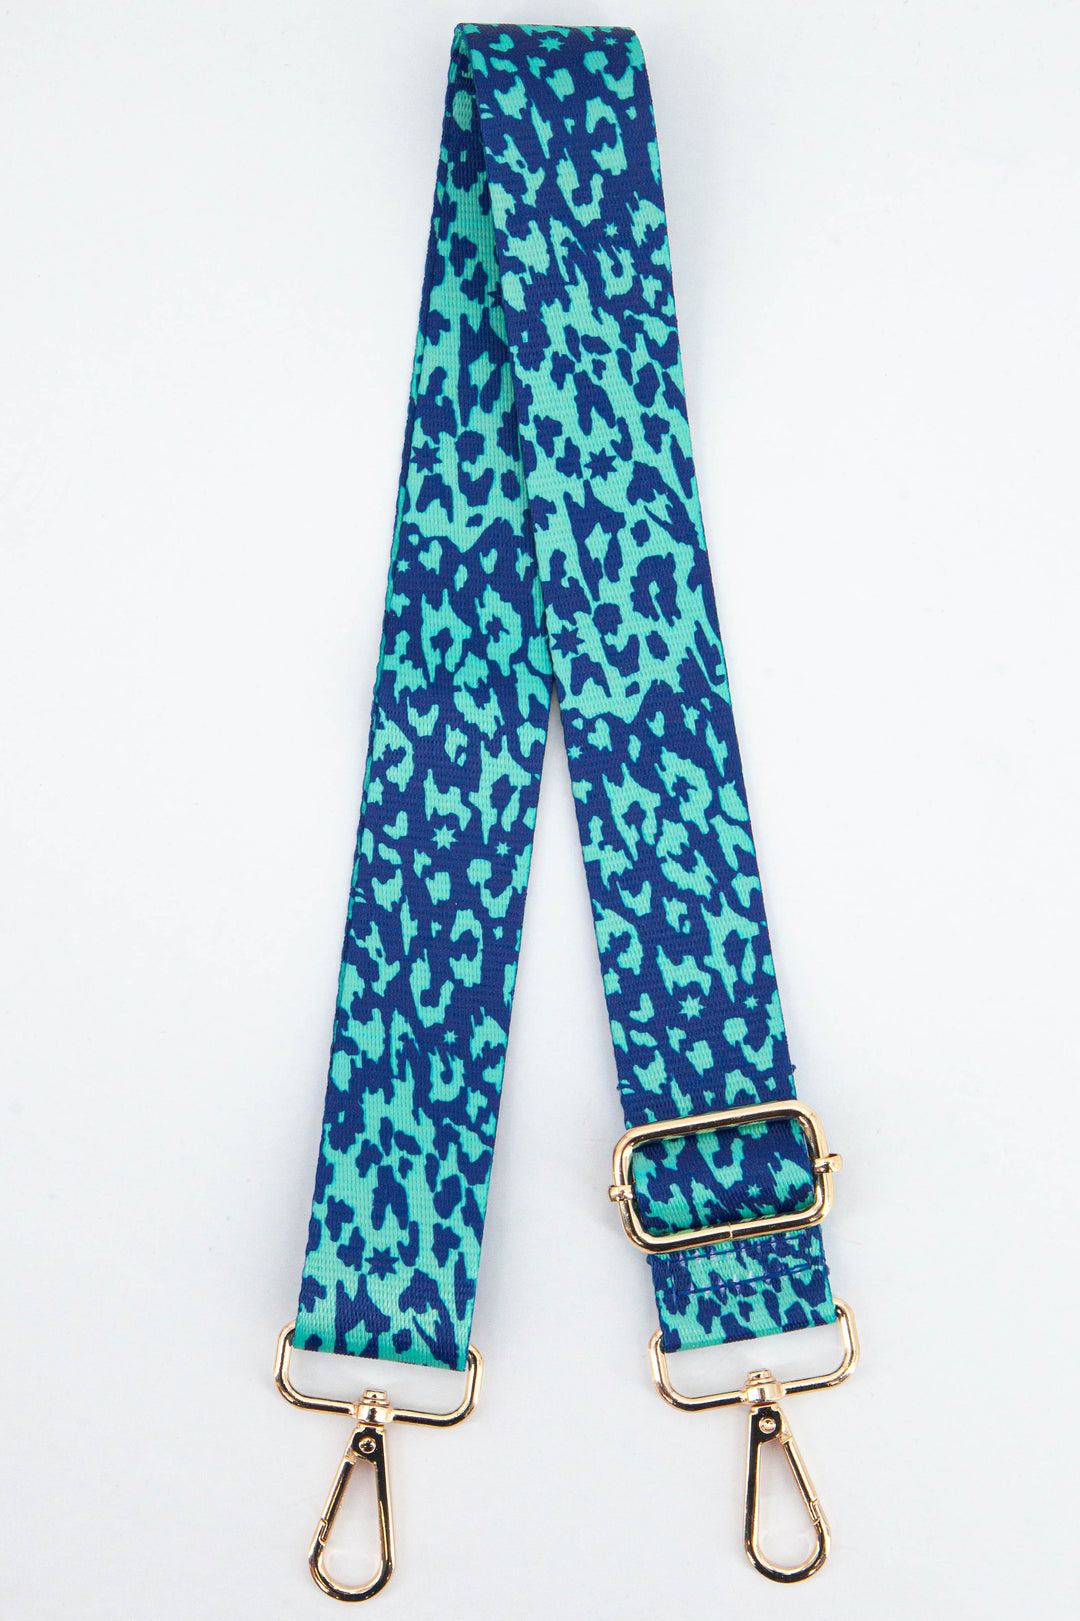 Two Tone Animal and Mini Star Print Bag Strap in Blue & Green